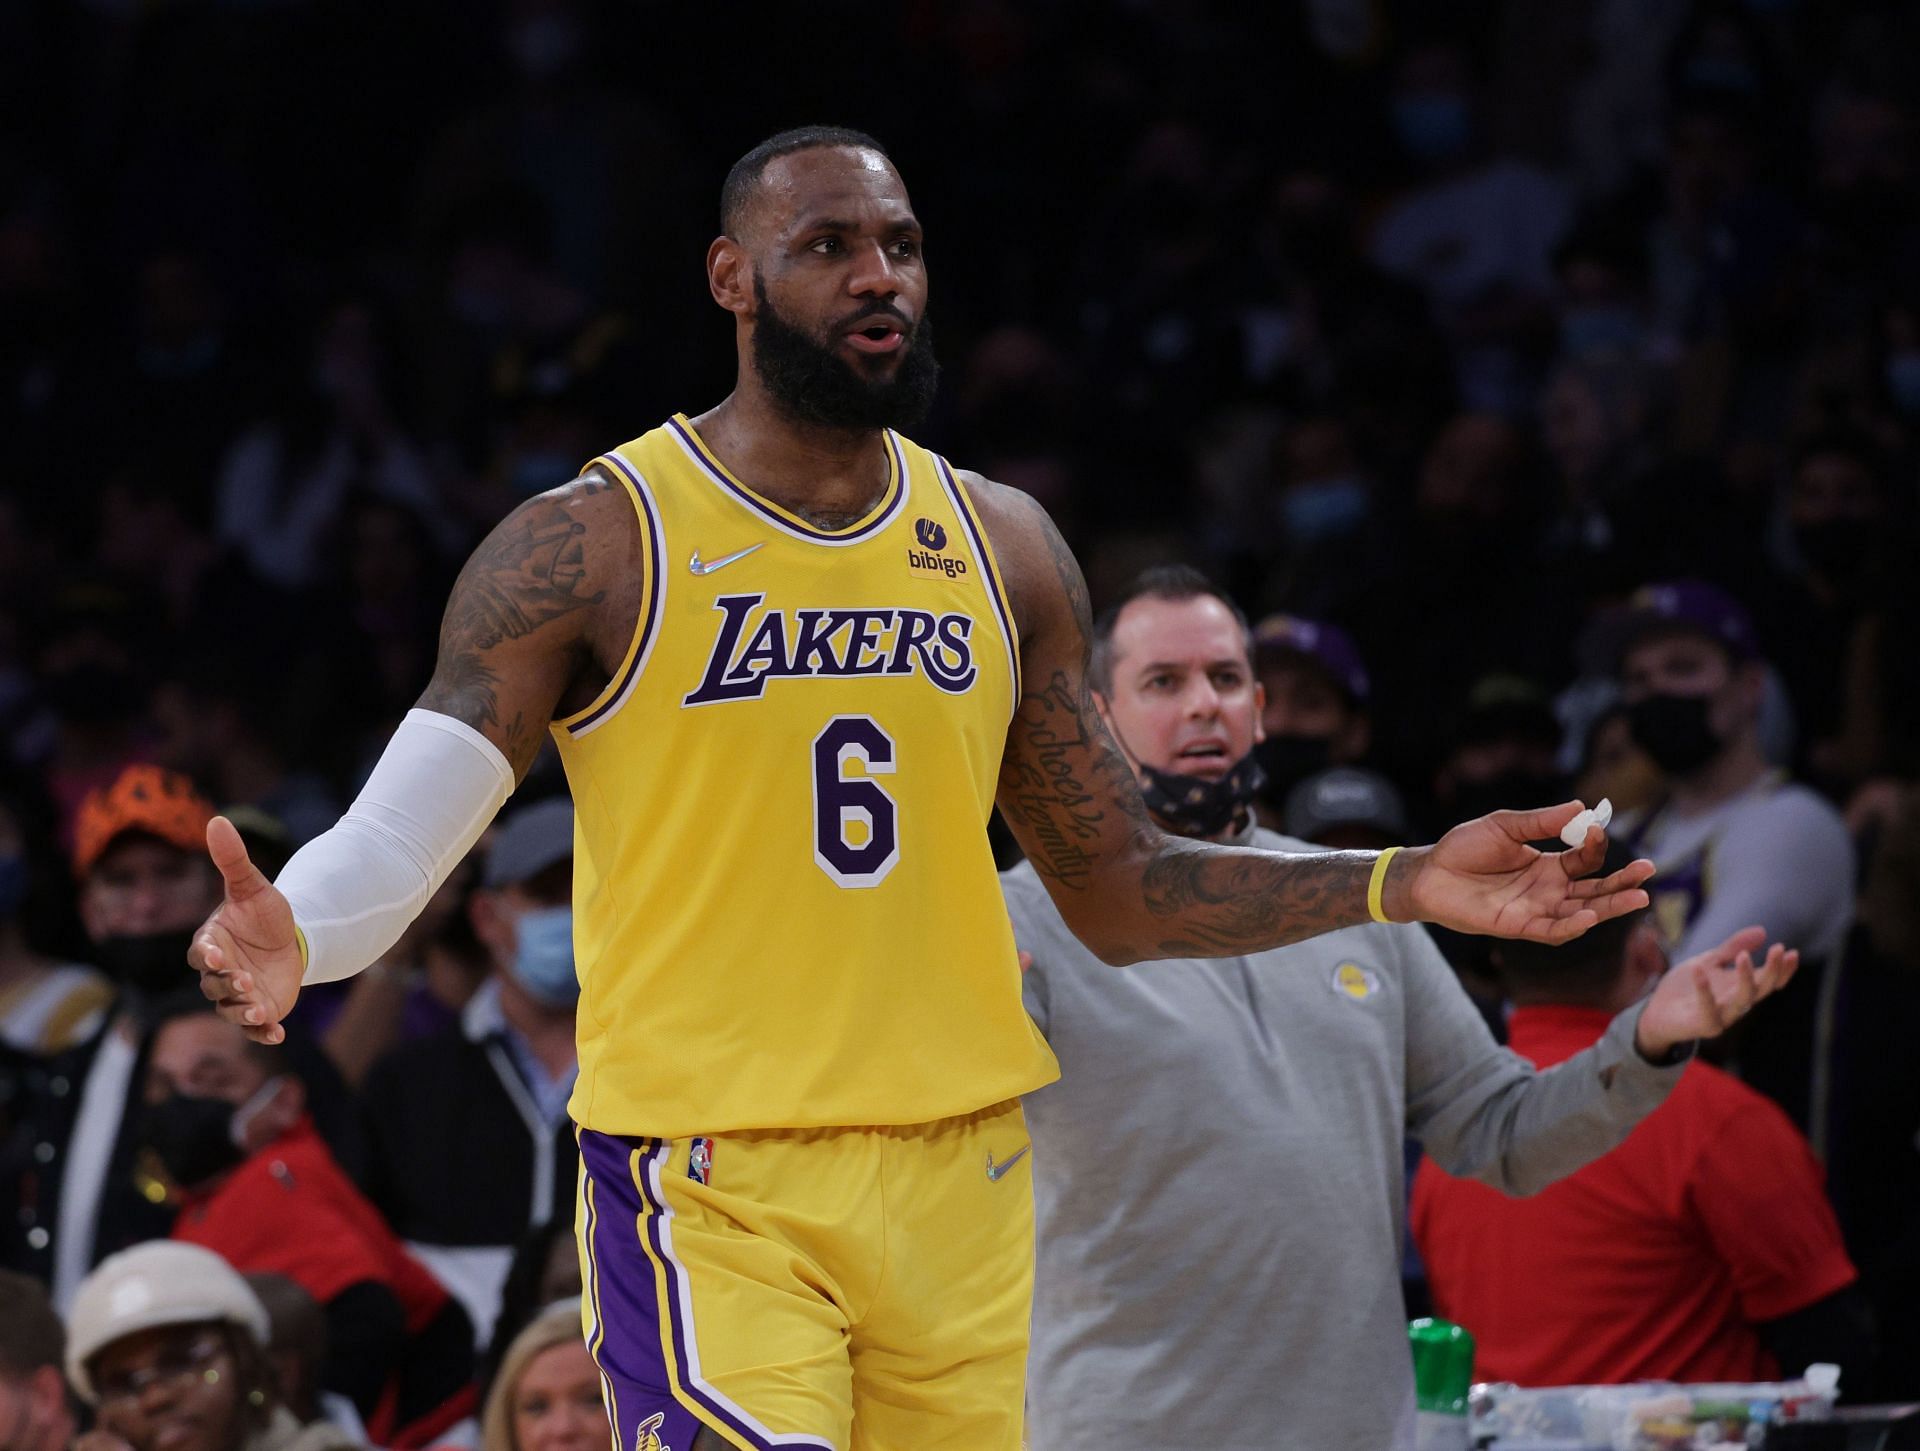 LeBron James will be looking to go on a winning run with the LA Lakers to finish the season on a high note.